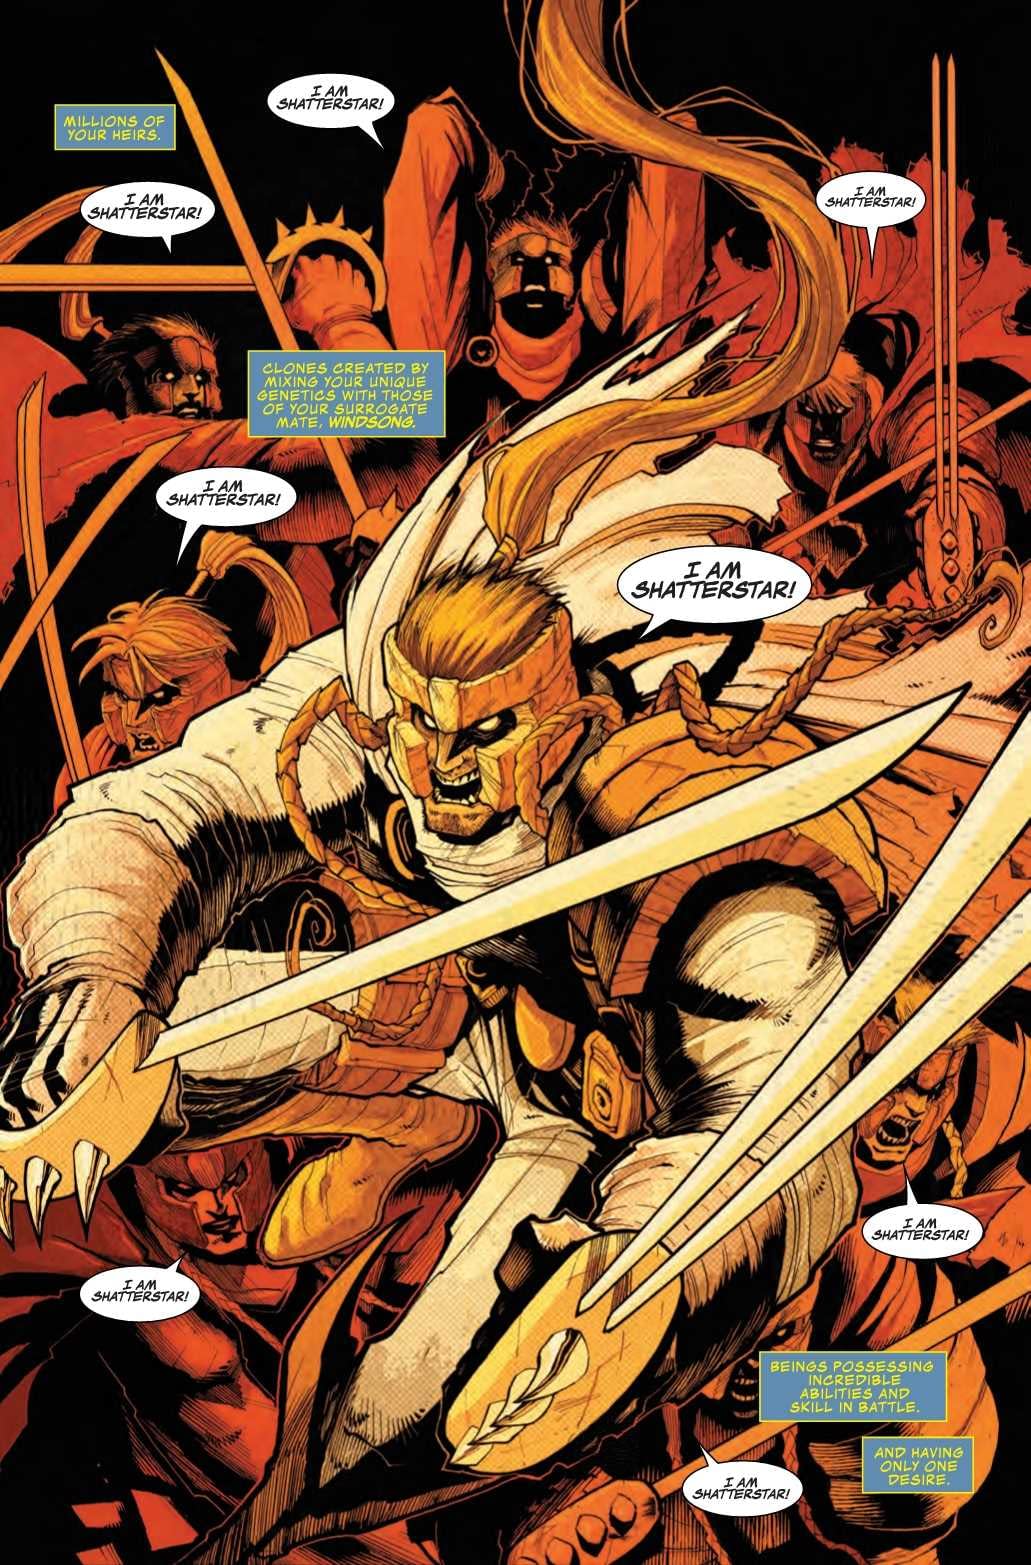 Killing Cable Again in Next Week's Shatterstar #5